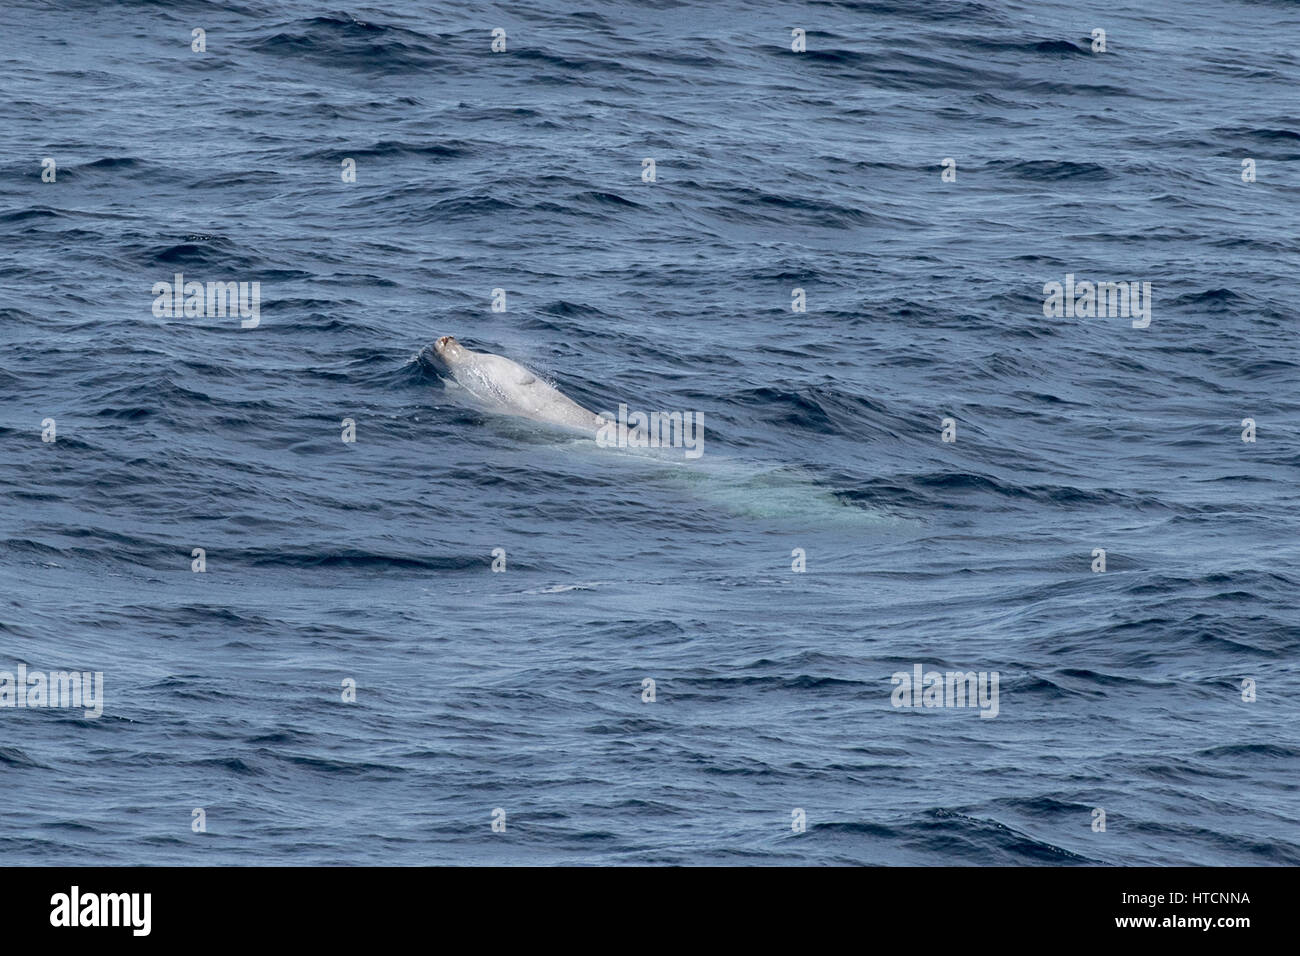 Male Cuvier's beaked whale or goose-beaked whale, Ziphius cavirostris, surfacing several hundred miles off Mauritania, North Africa Stock Photo